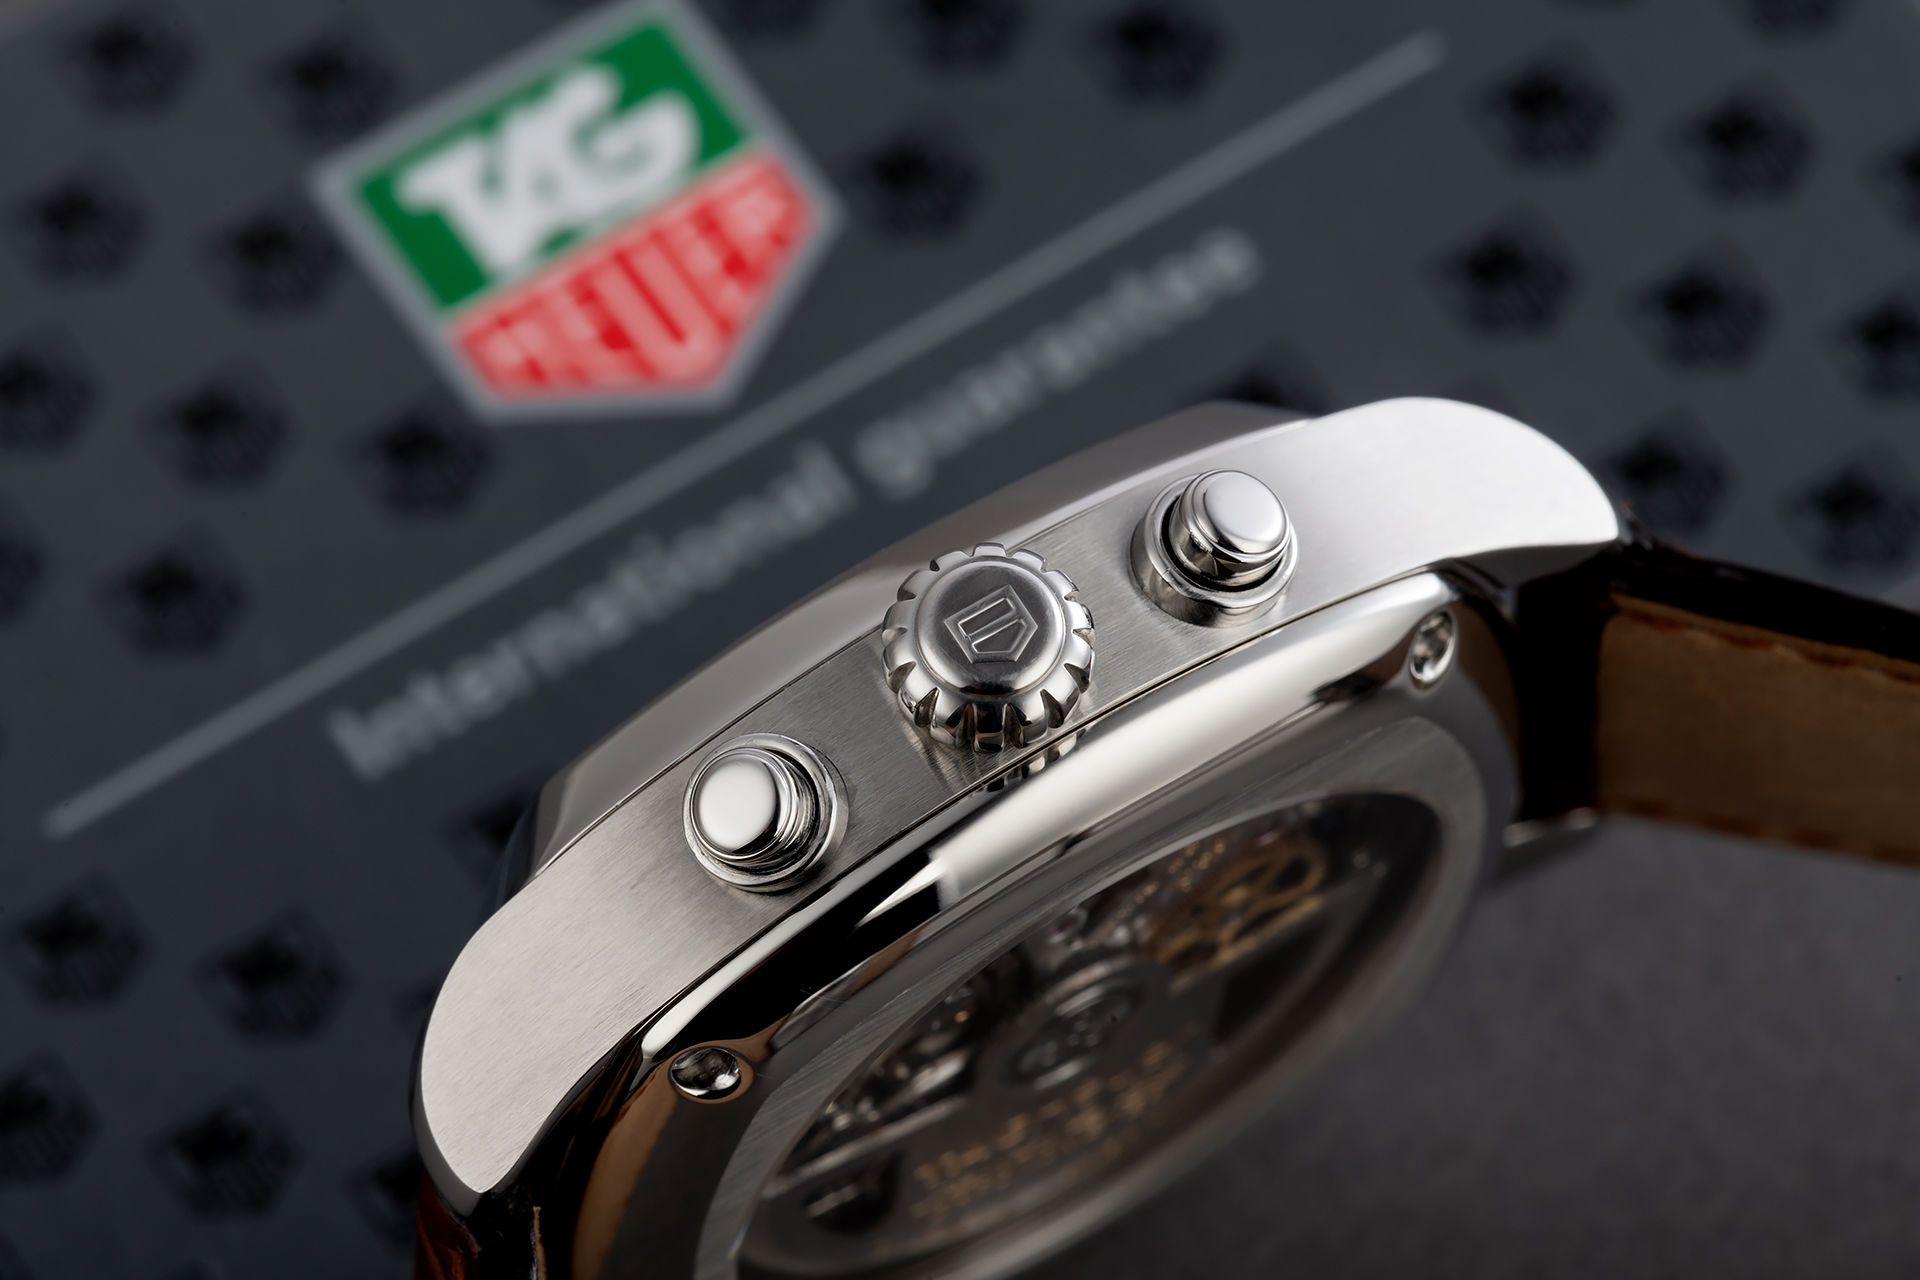 ref CR5110 | 'Full Set' Automatic Chronograph | Tag Heuer Monza